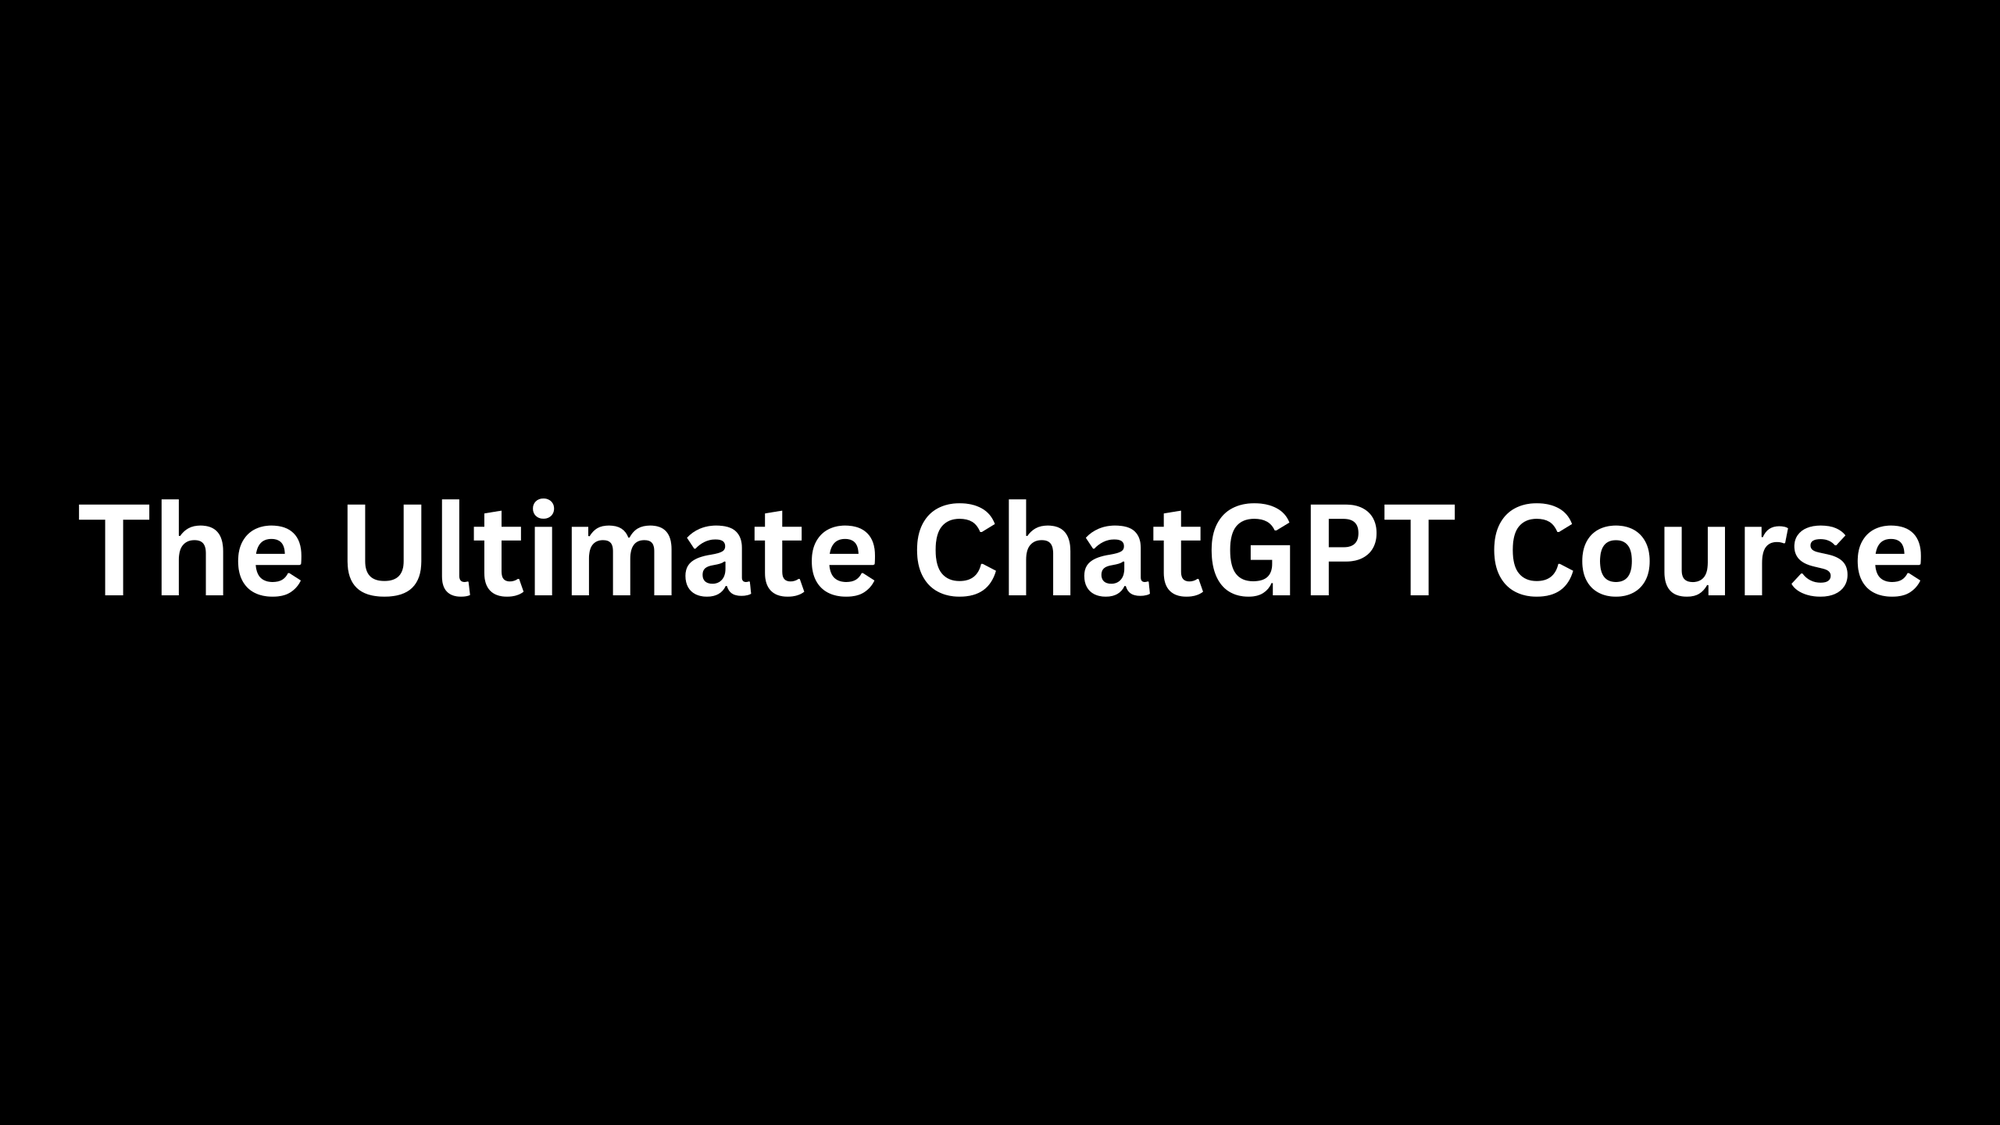 The Ultimate Chat GPT Course